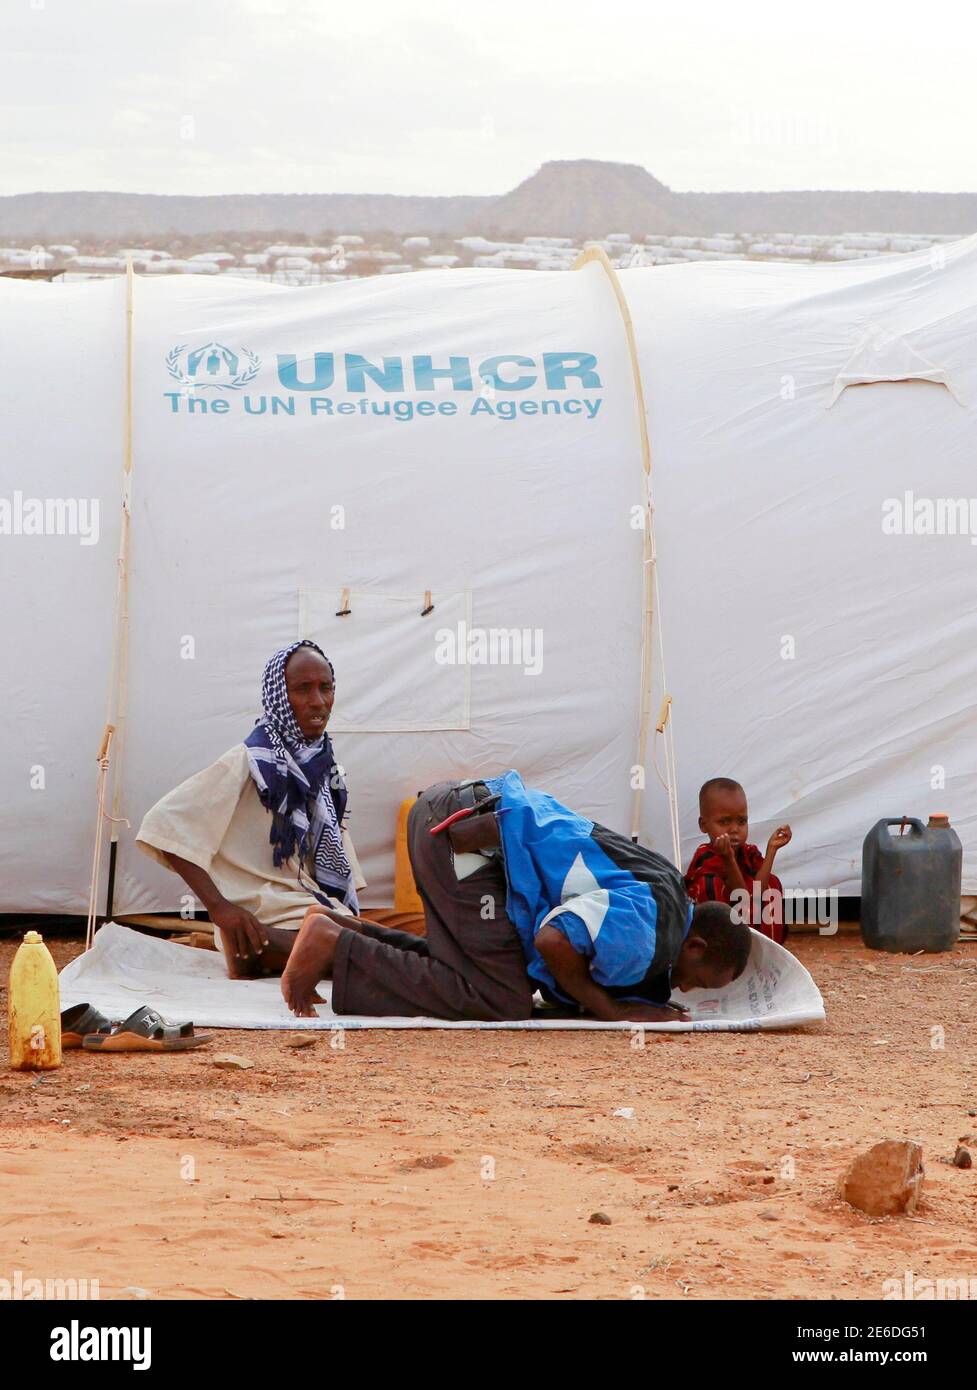 A Somali refugee man prays outside his tent at the Kobe refugee camp 60 km (37.3 miles) from Dolo Ado near the Ethiopia-Somalia border, August 10, 2011. The U.N. refugee agency and a government agency have established four camps along the Ethiopian border with Somalia to accommodate a refugee population that now exceeds 120,000 most of whom are victims of drought and famine; the worst in decades, and has affected about 12 million people across the Horn of Africa. REUTERS/Thomas Mukoya (ETHIOPIA - Tags: ENVIRONMENT DISASTER RELIGION) Stock Photo